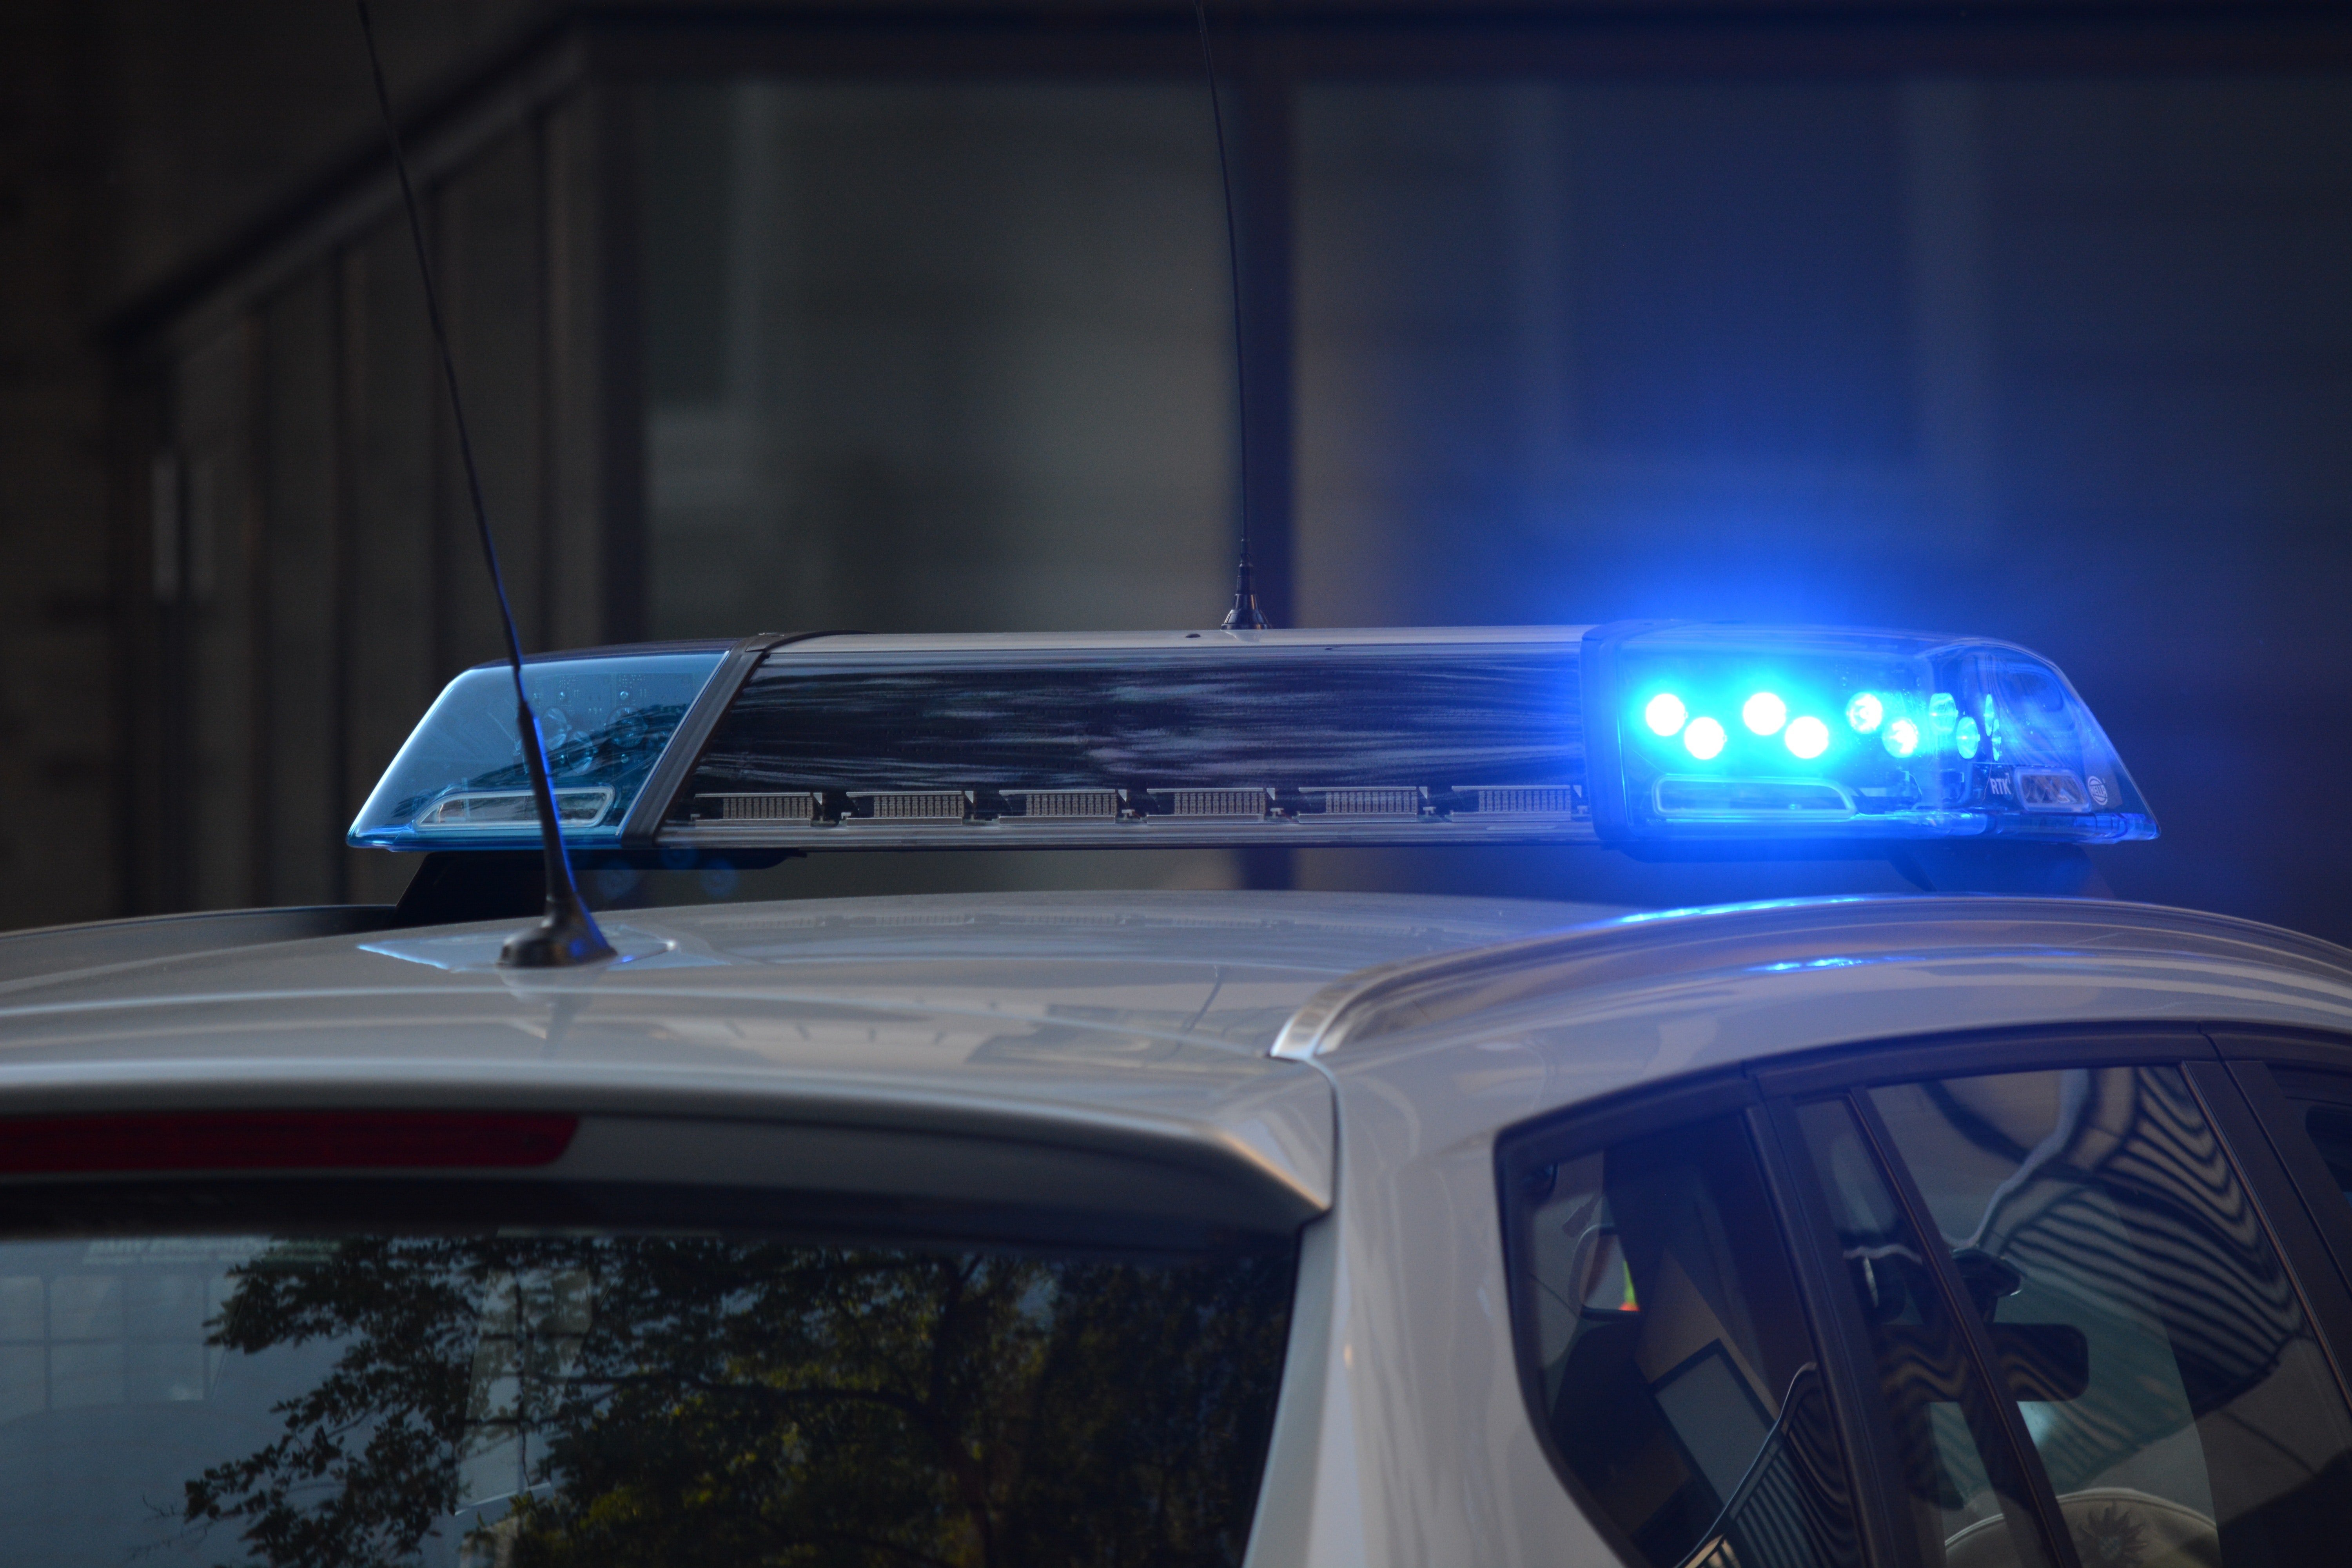 Pictured - An image of a police vehicle with blue lights on | Source: Pexels 